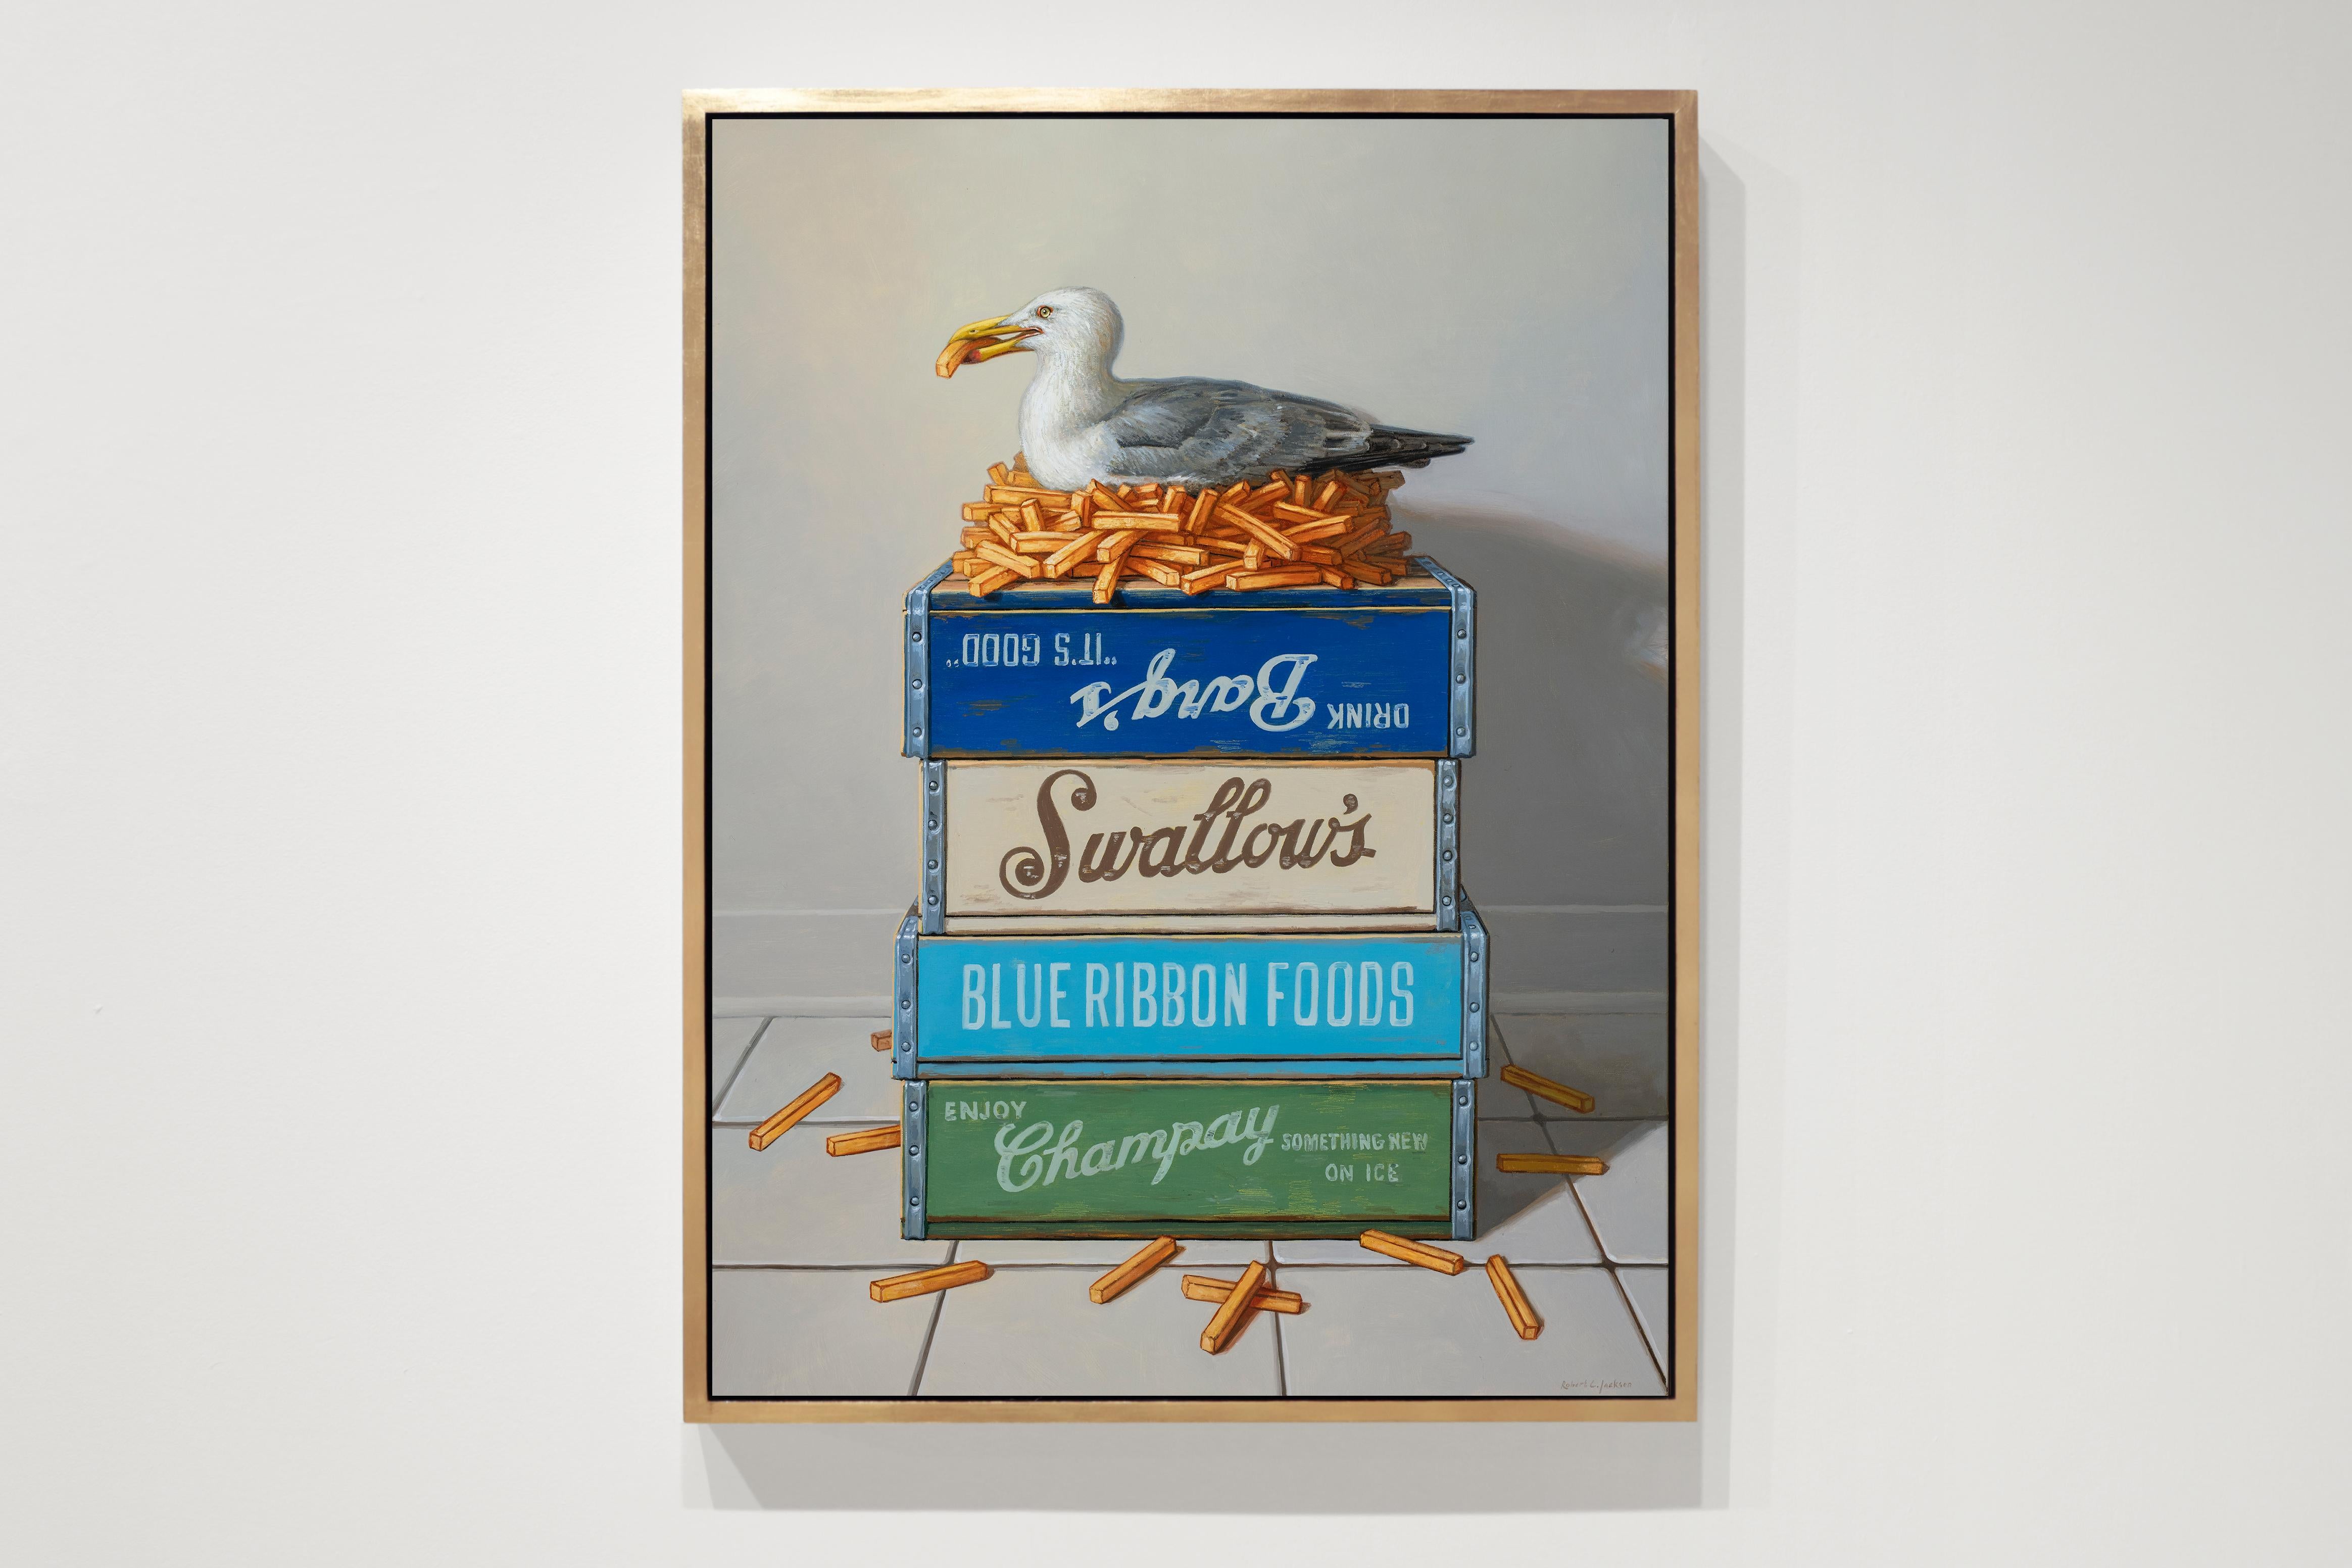 DREAM HOME, satire, humor, photorealism, bird, seagull, vibrant colors, fries - Painting by Robert Jackson